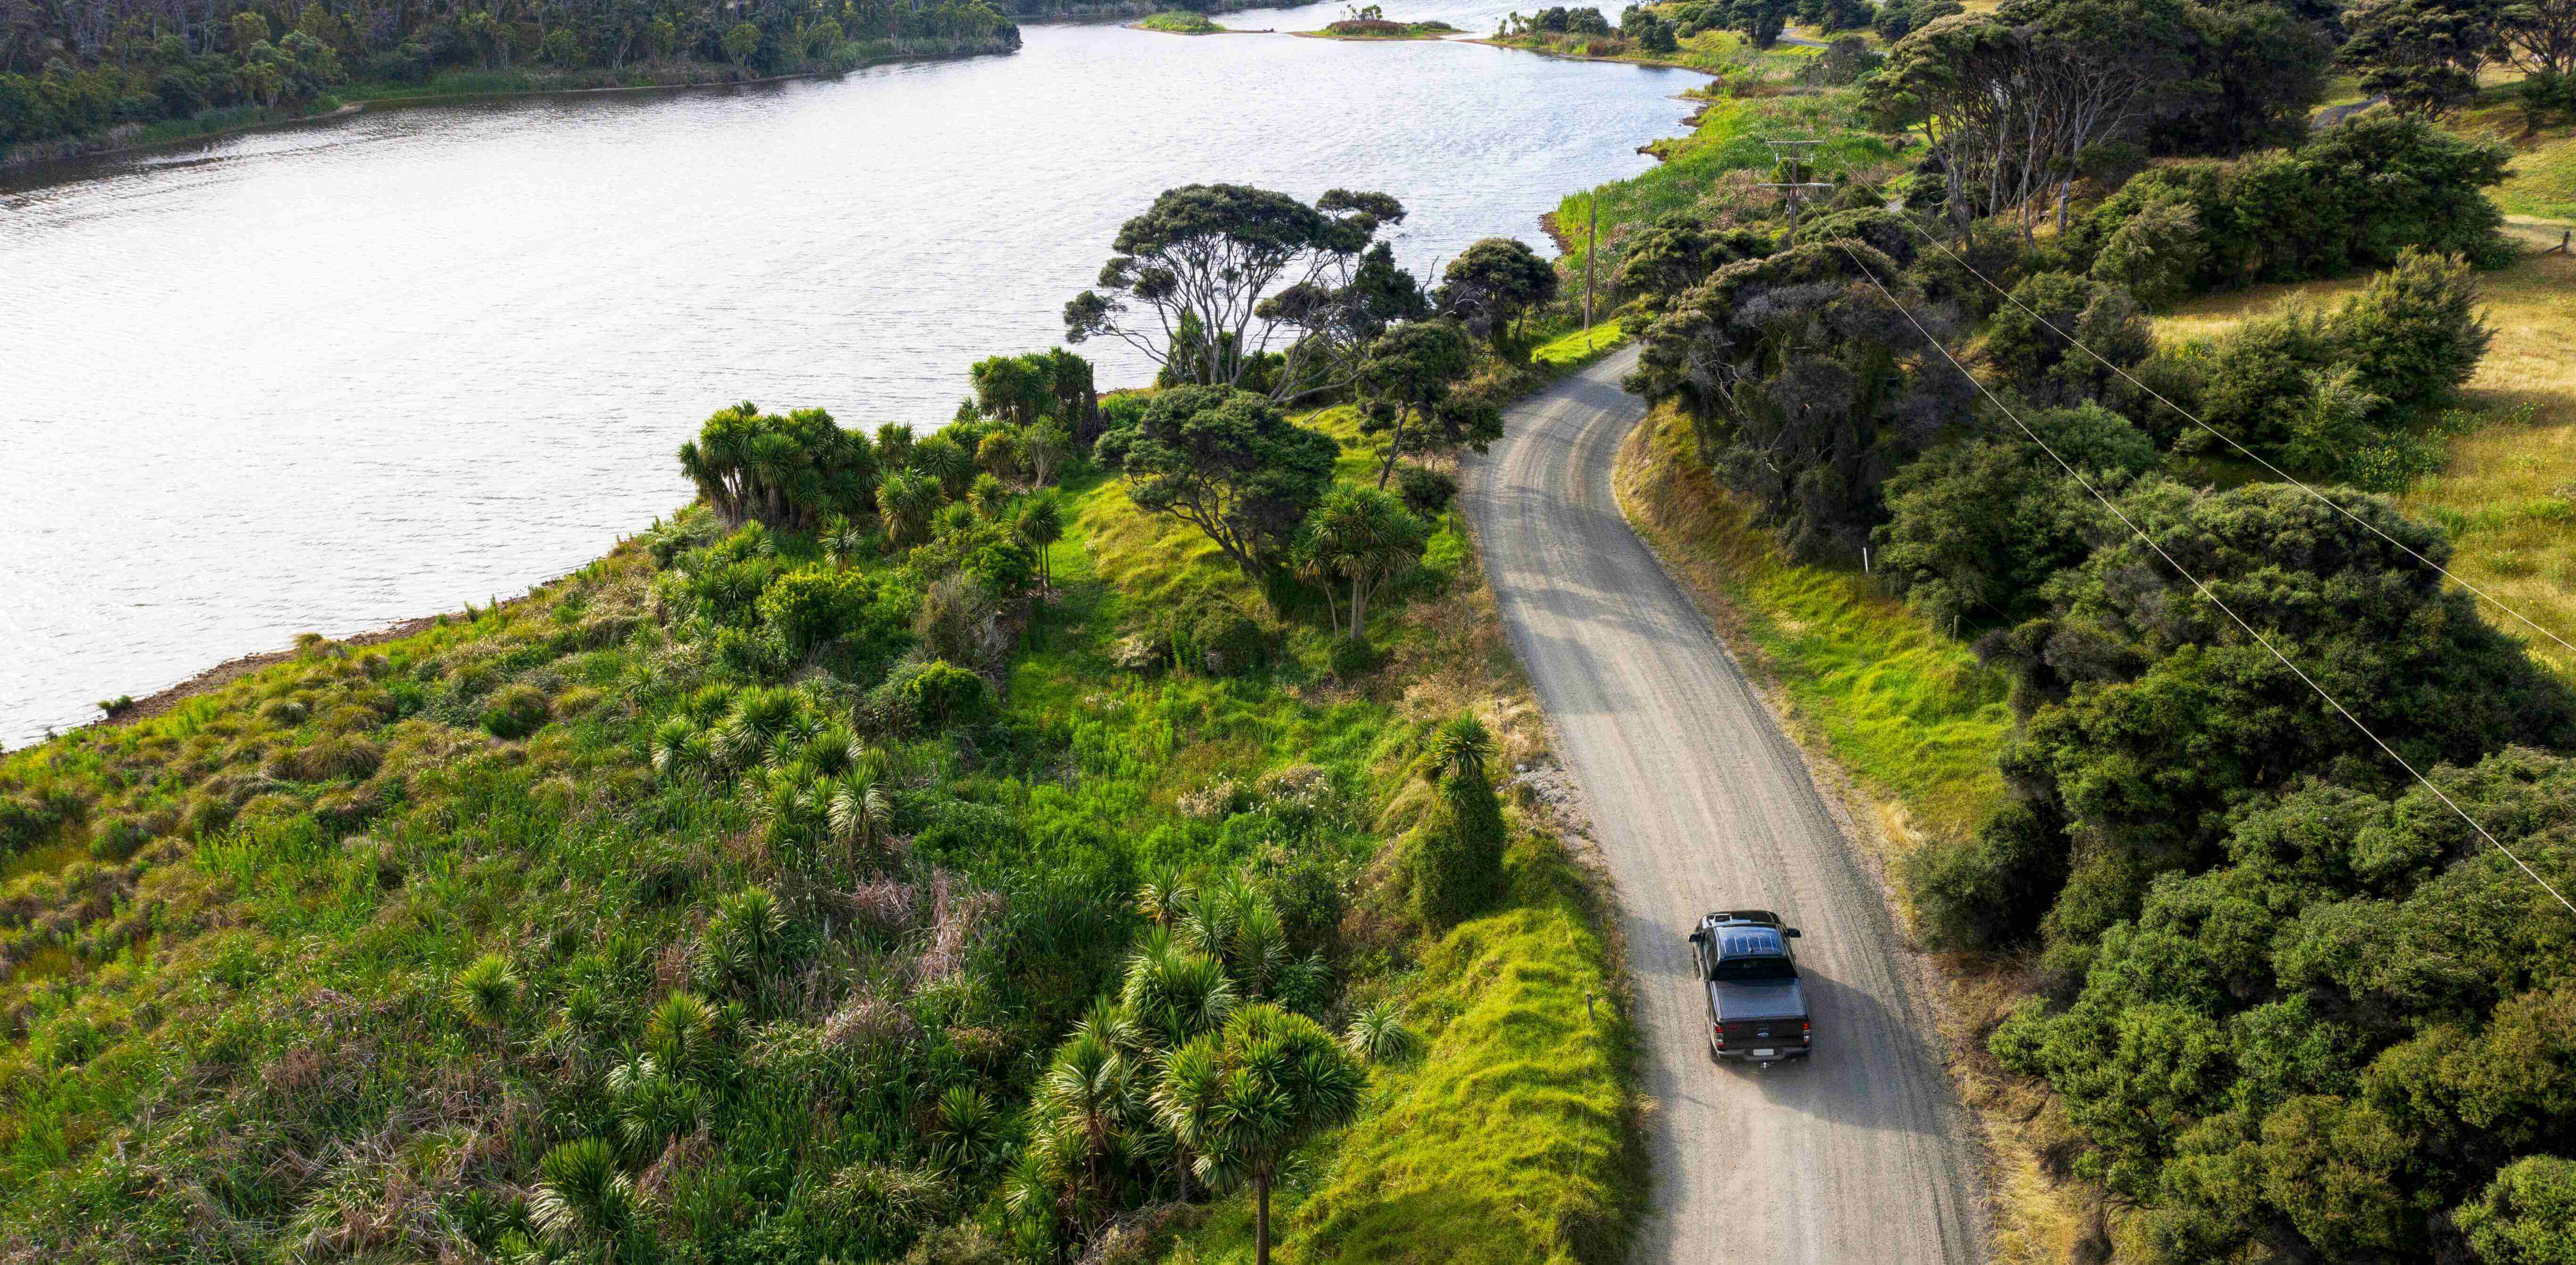 Aerial view of the rural road along the lake with a car passing through